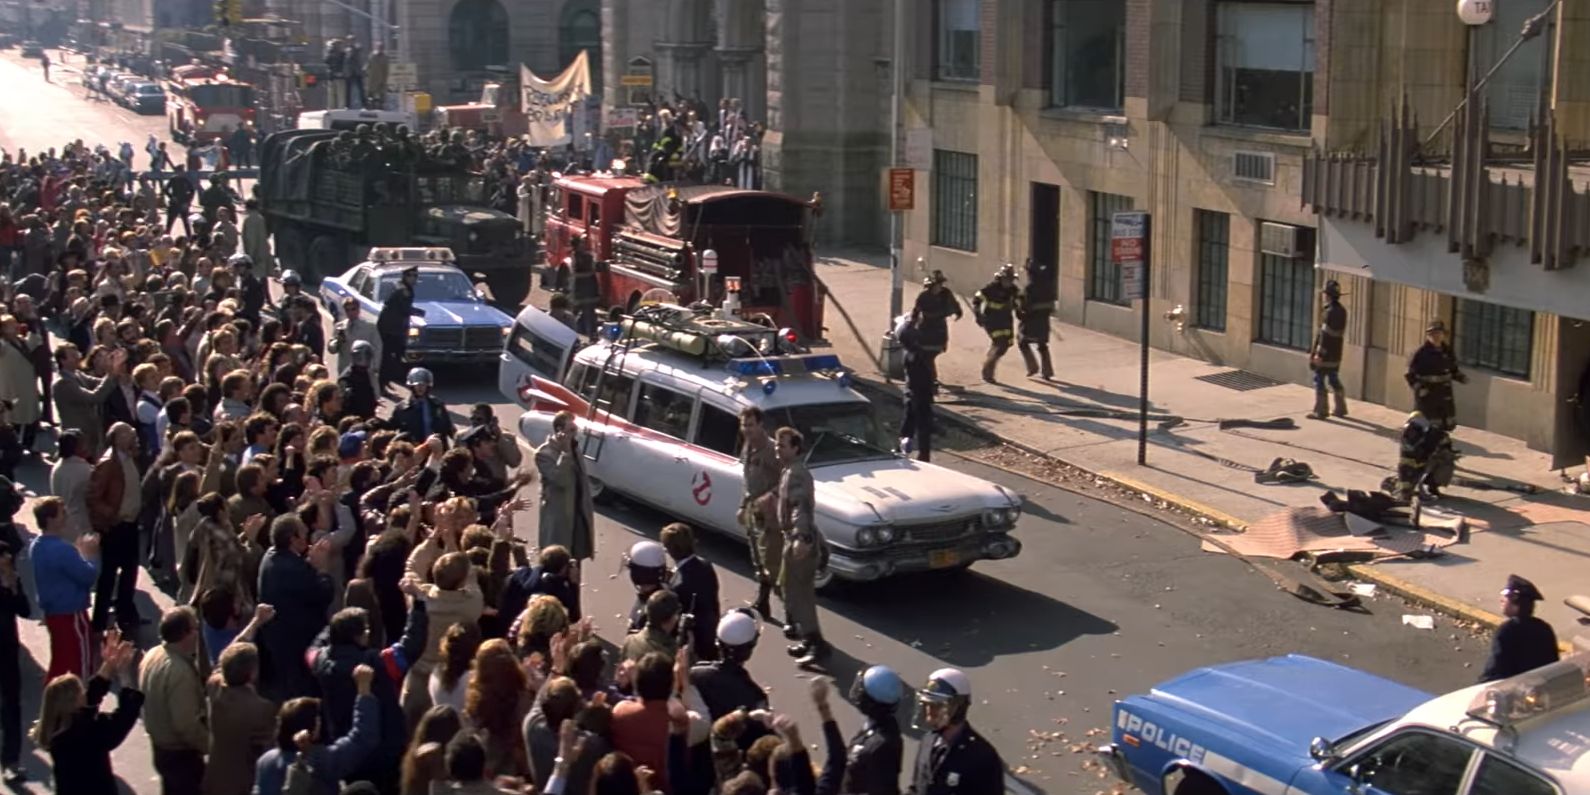 The Ghostbusters arriving with Ecto-1 at the Shandor building in Ghostbusters 1984